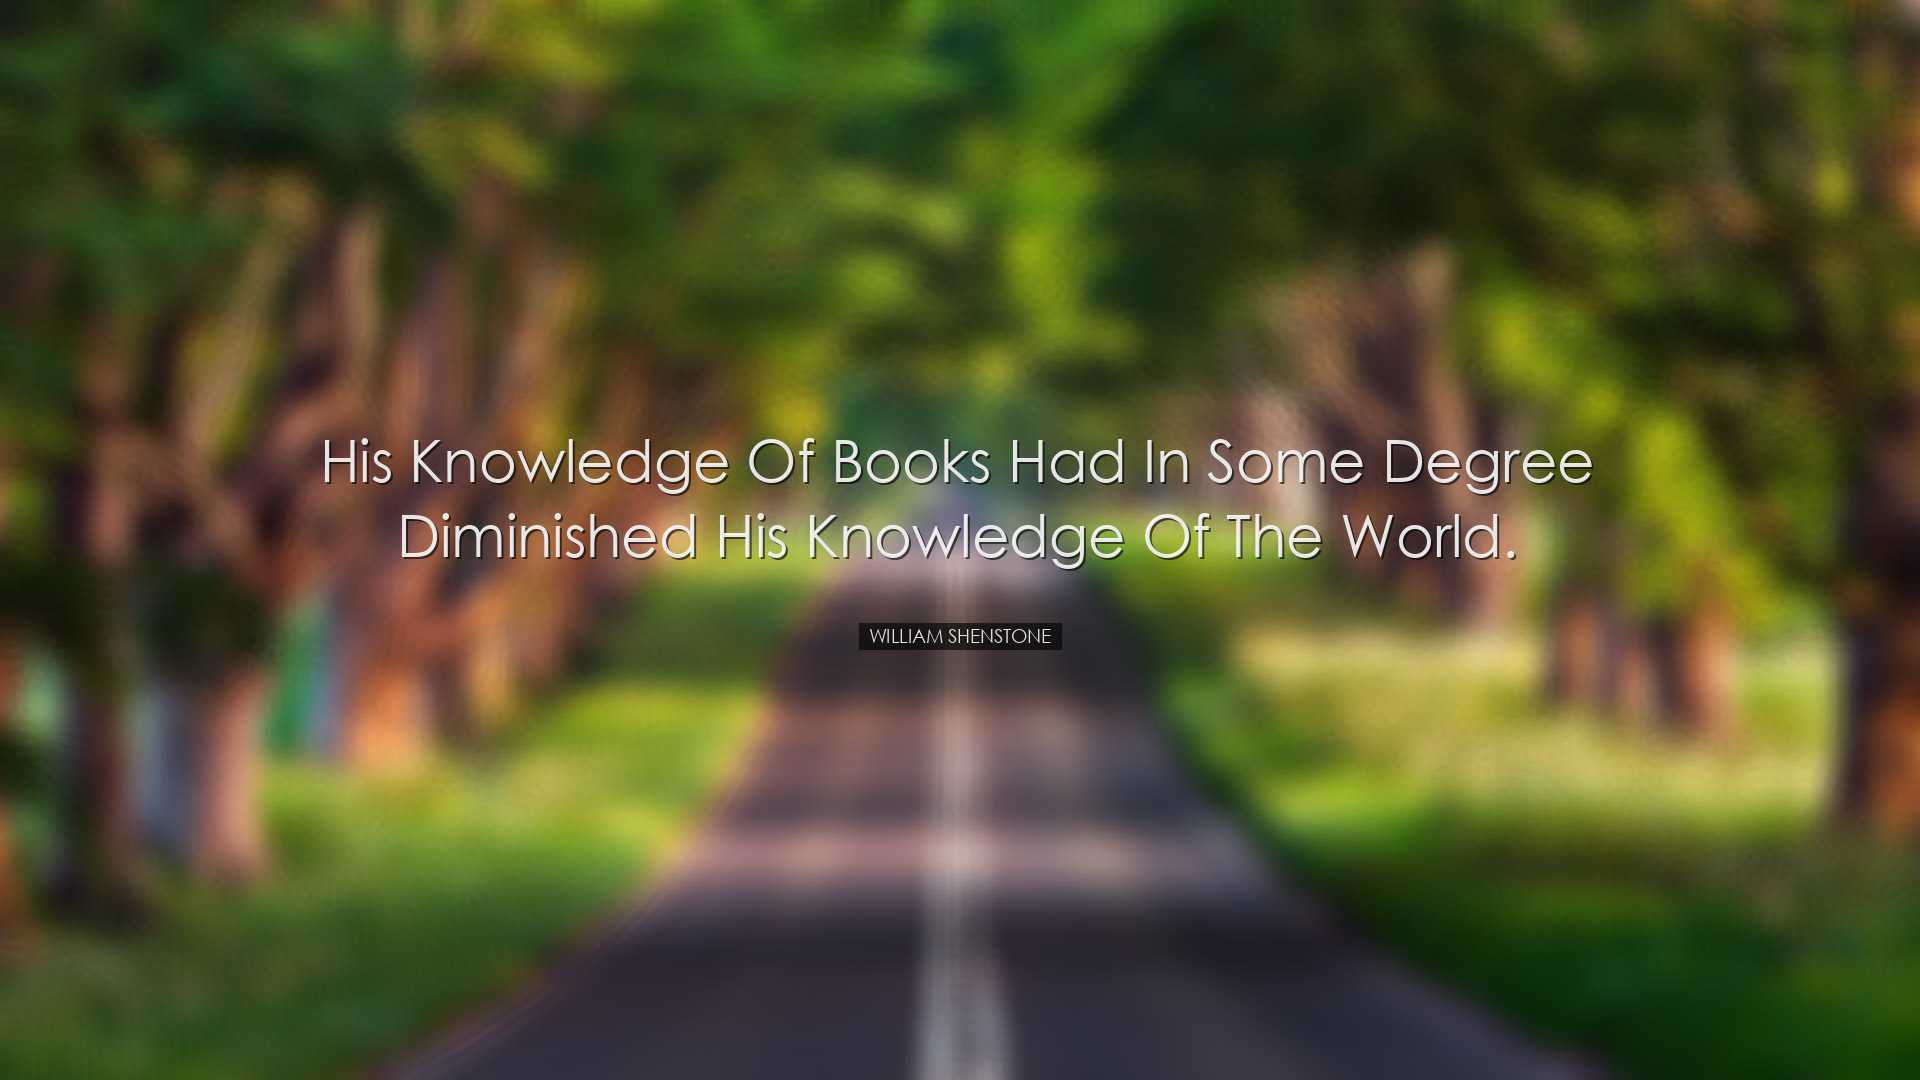 His knowledge of books had in some degree diminished his knowledge